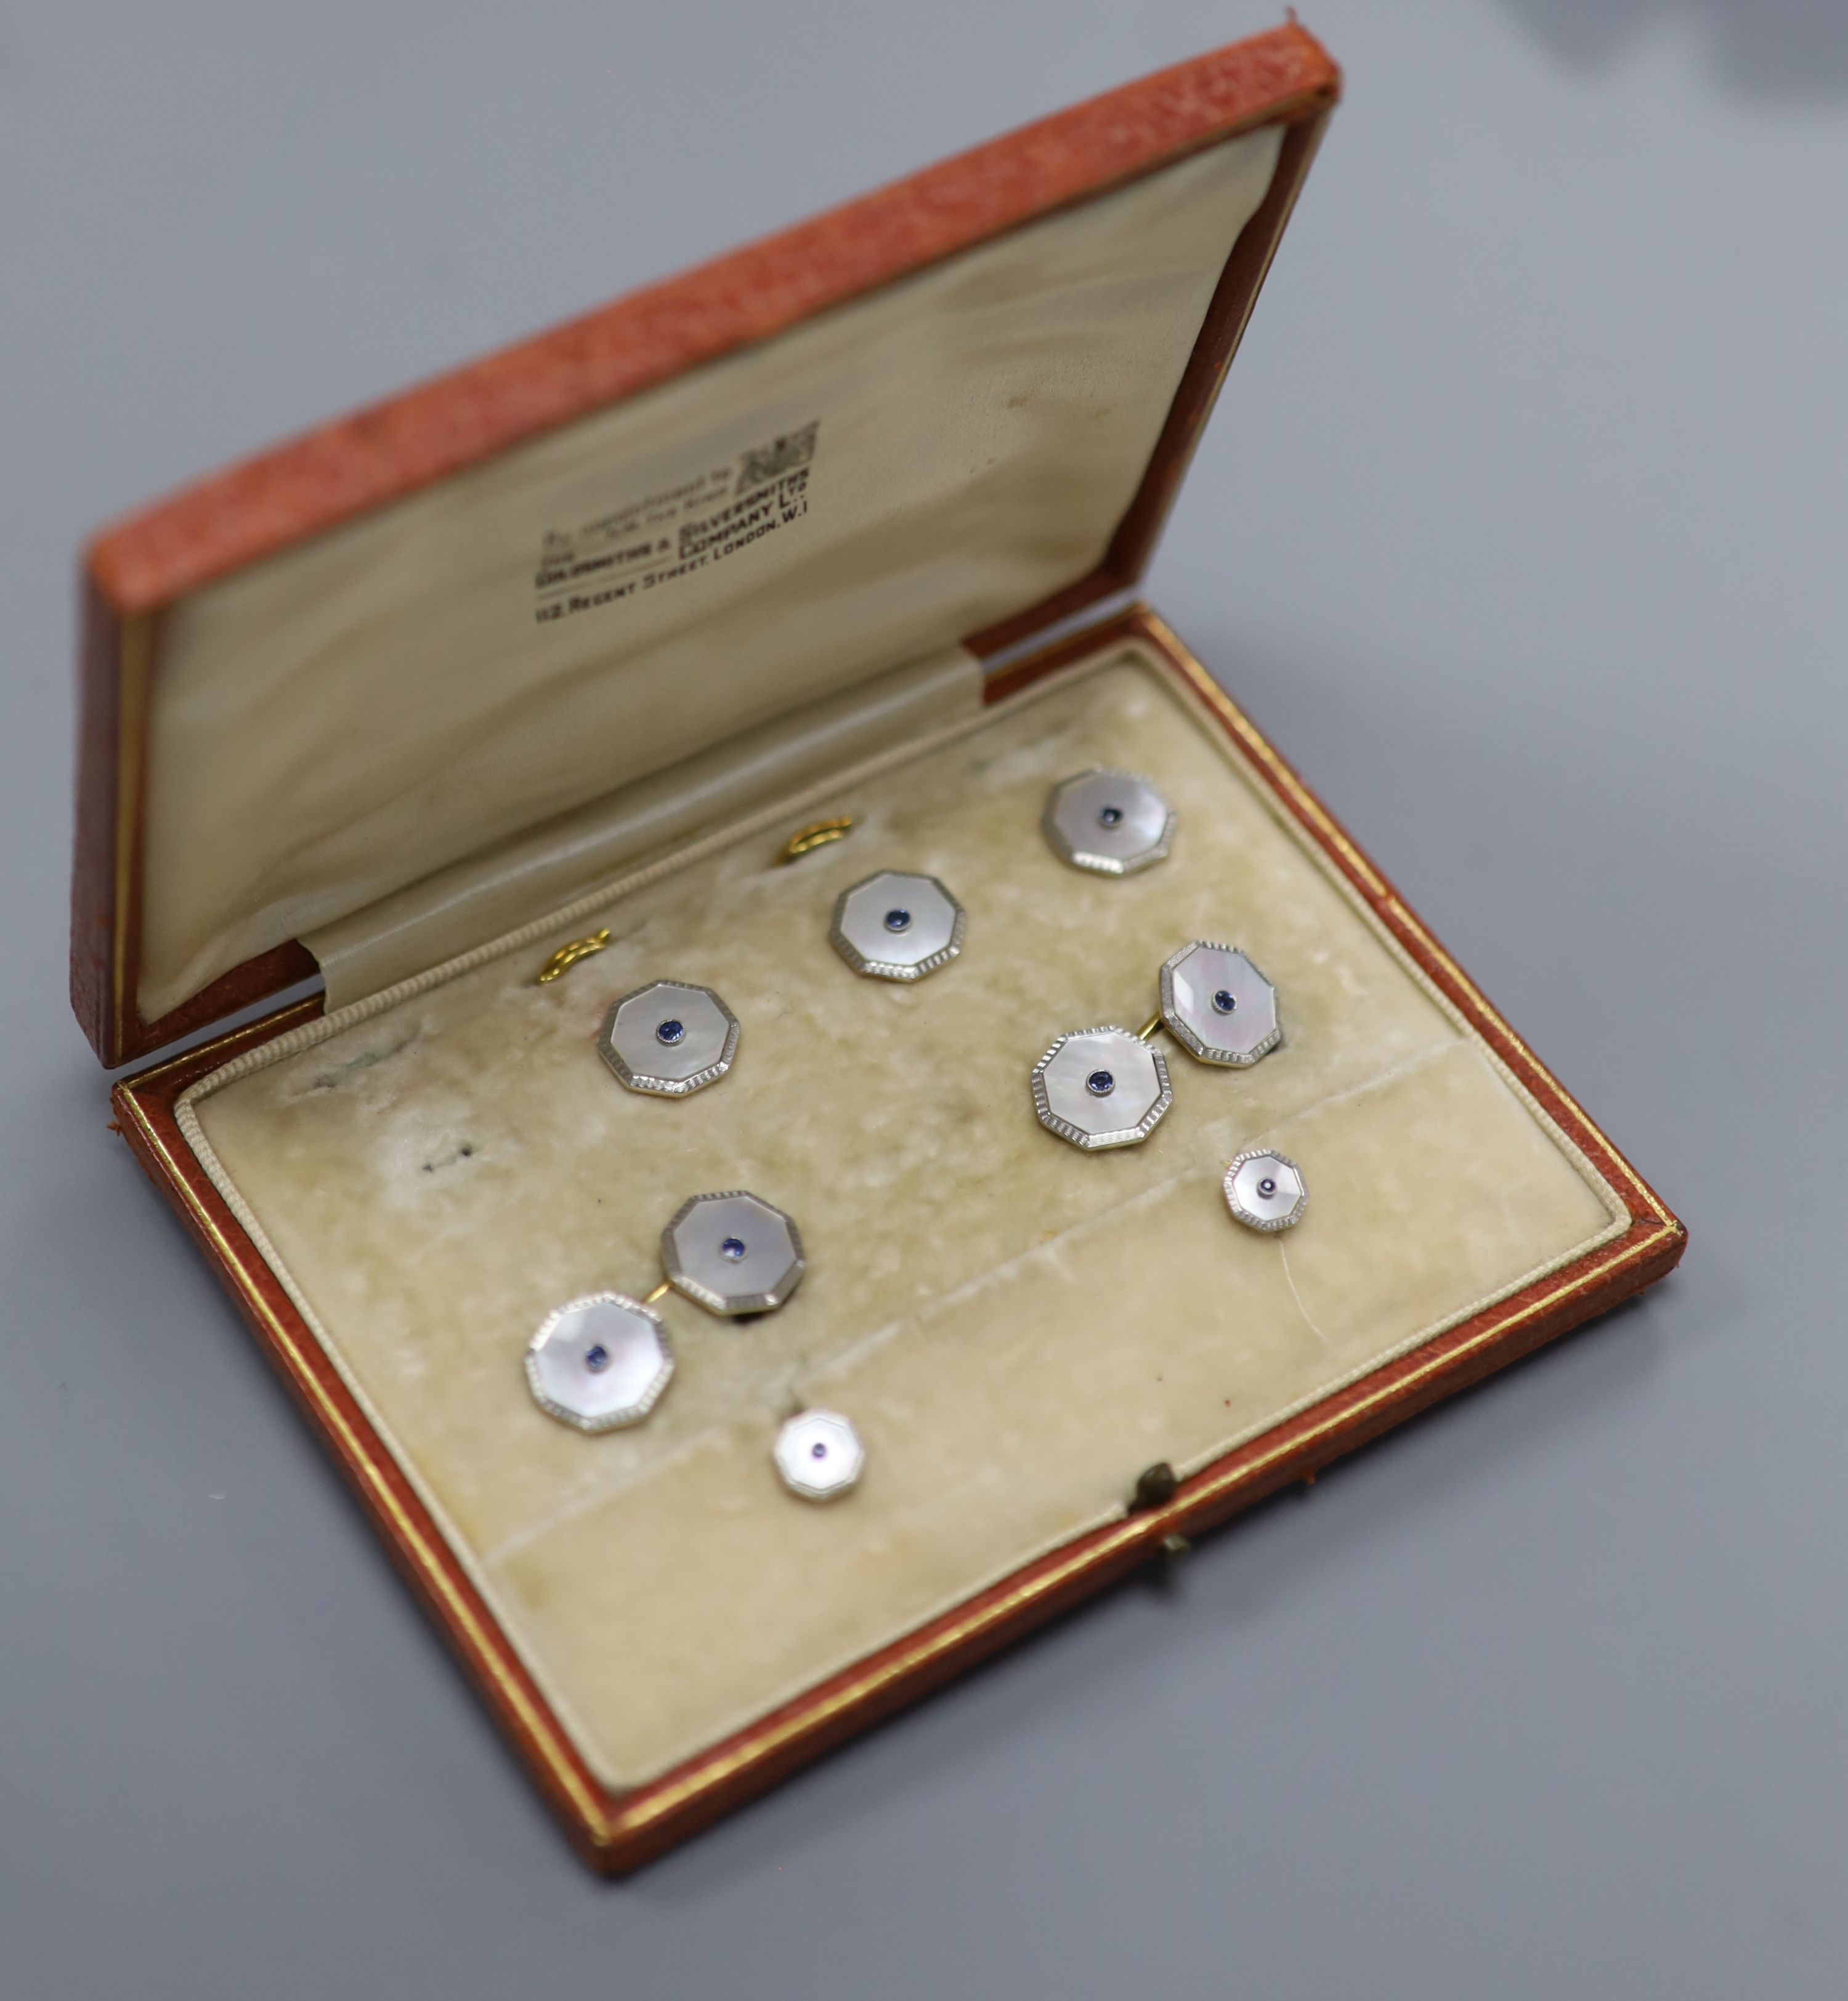 An early 20th century 18ct & Pt, mother of pearl and sapphire set octagonal part dress stud set (one stud missing)